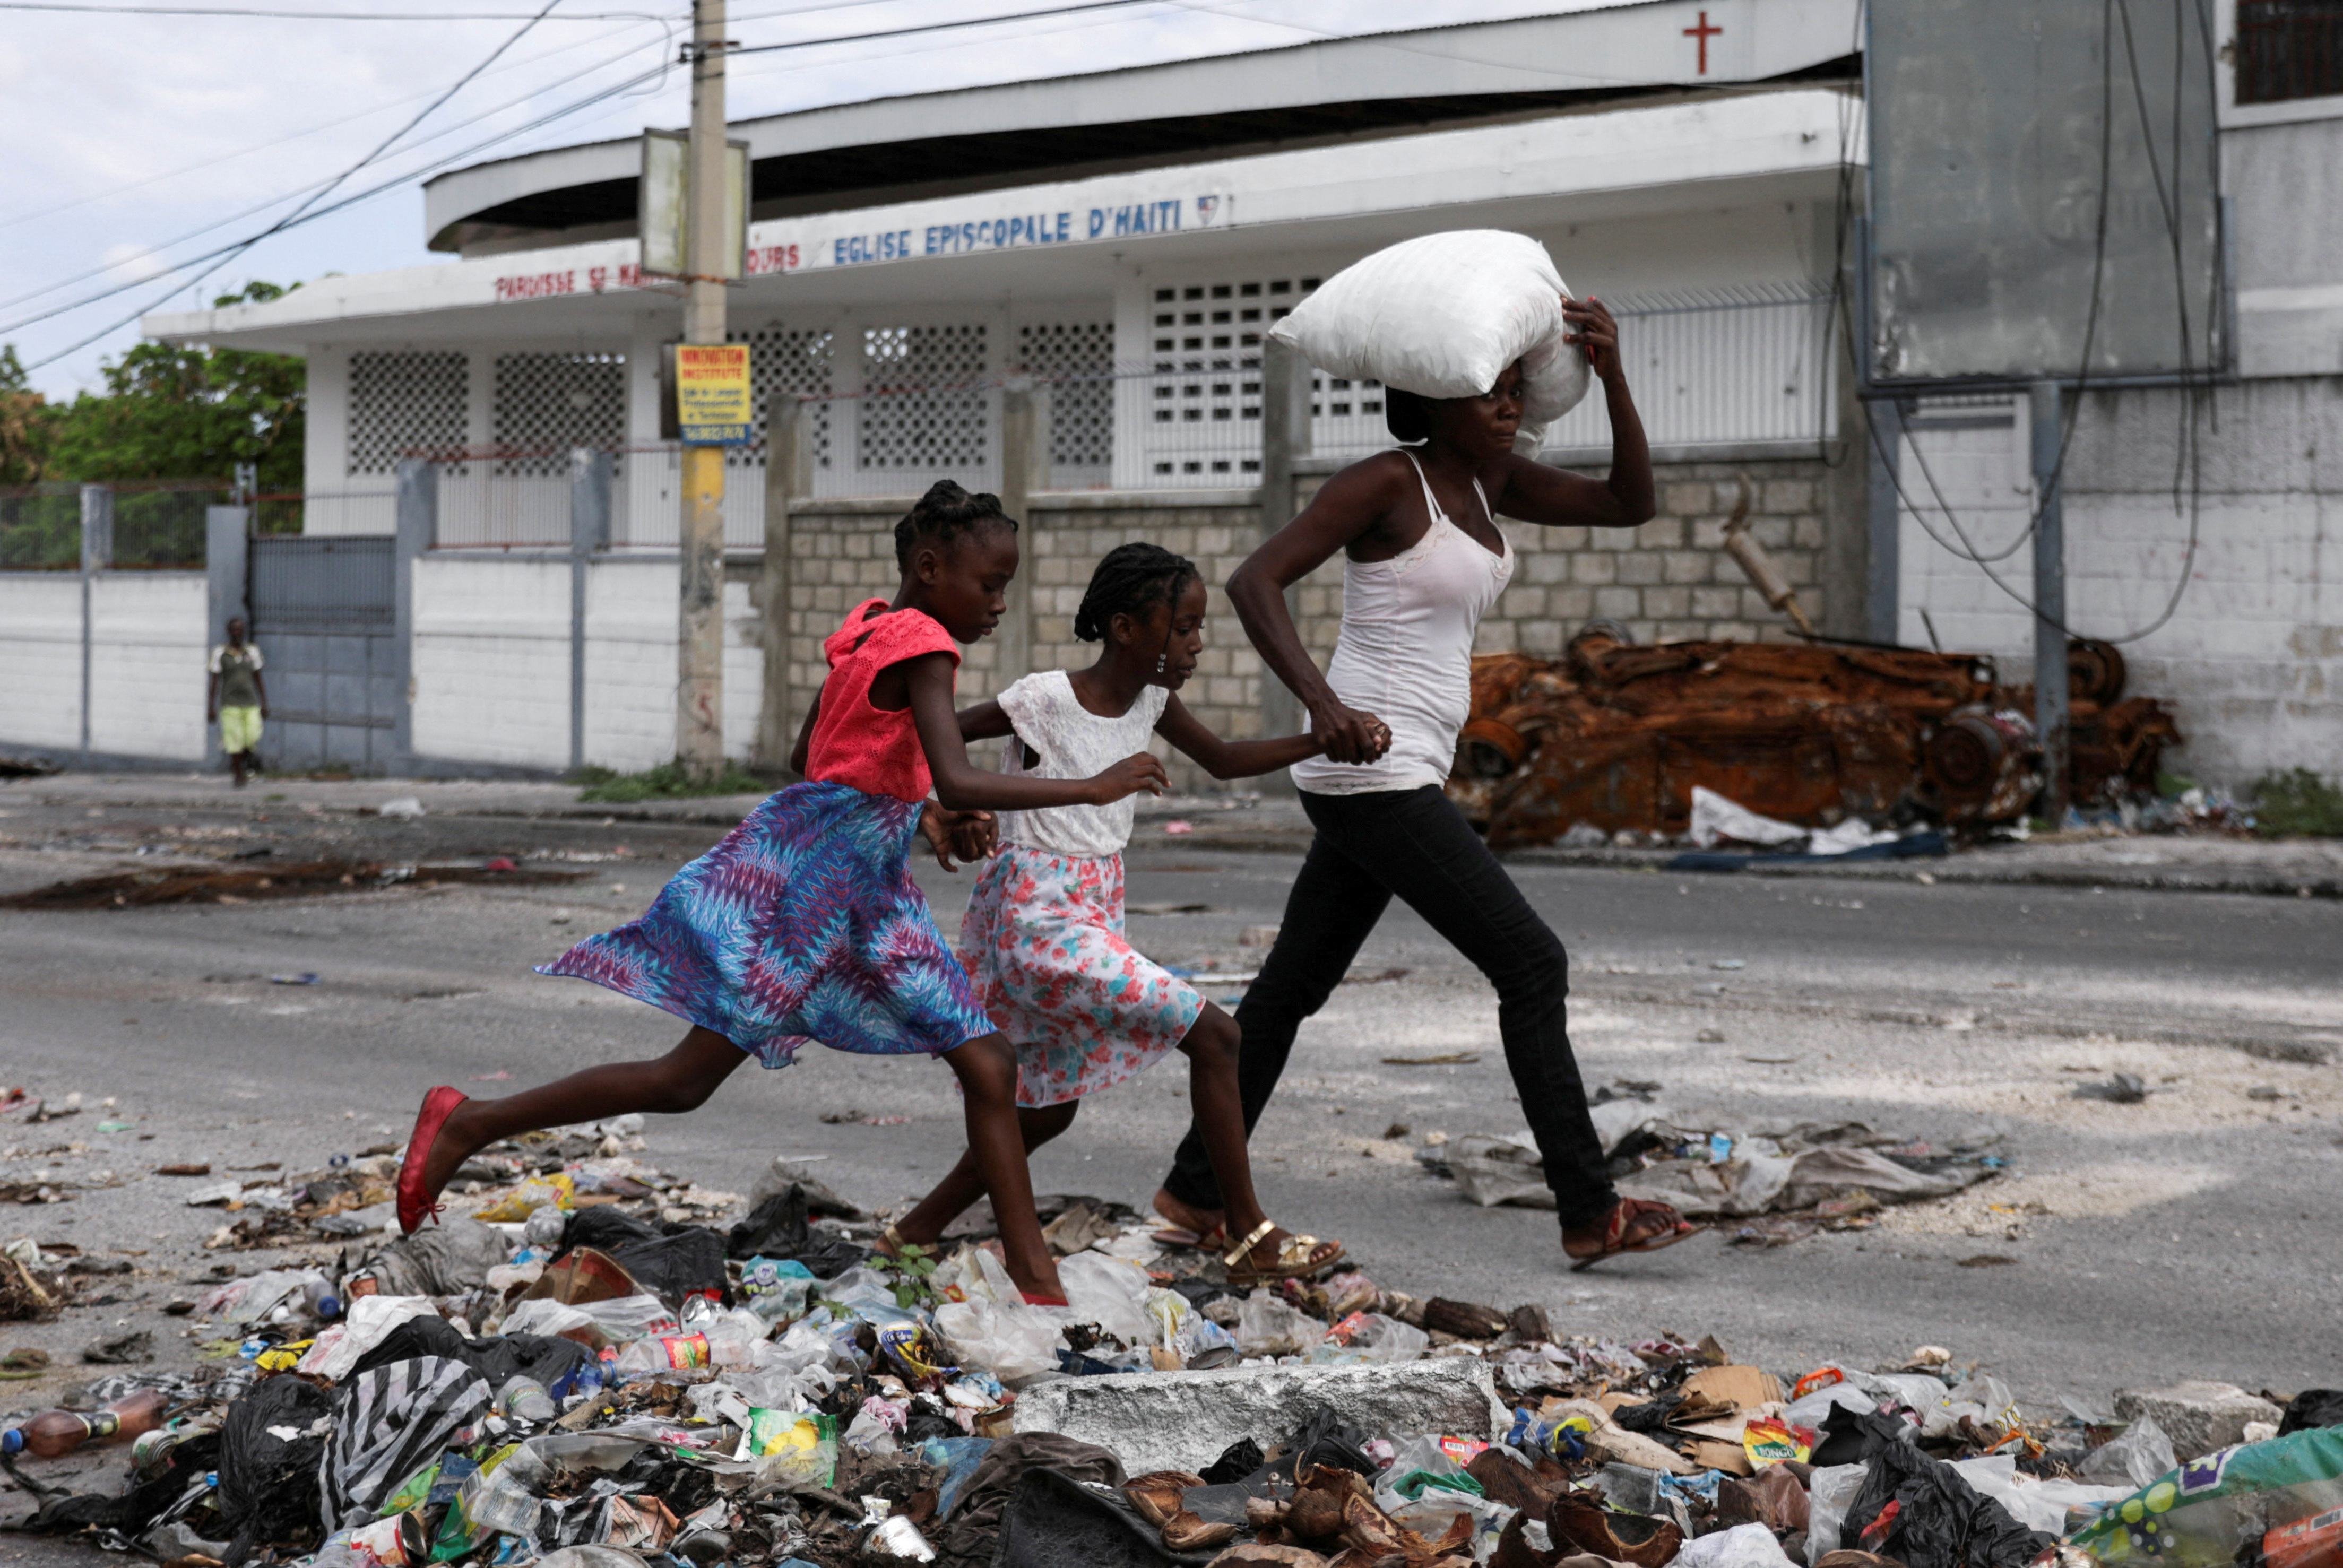 Residents flee homes due to gang violence, in Port-au-Prince